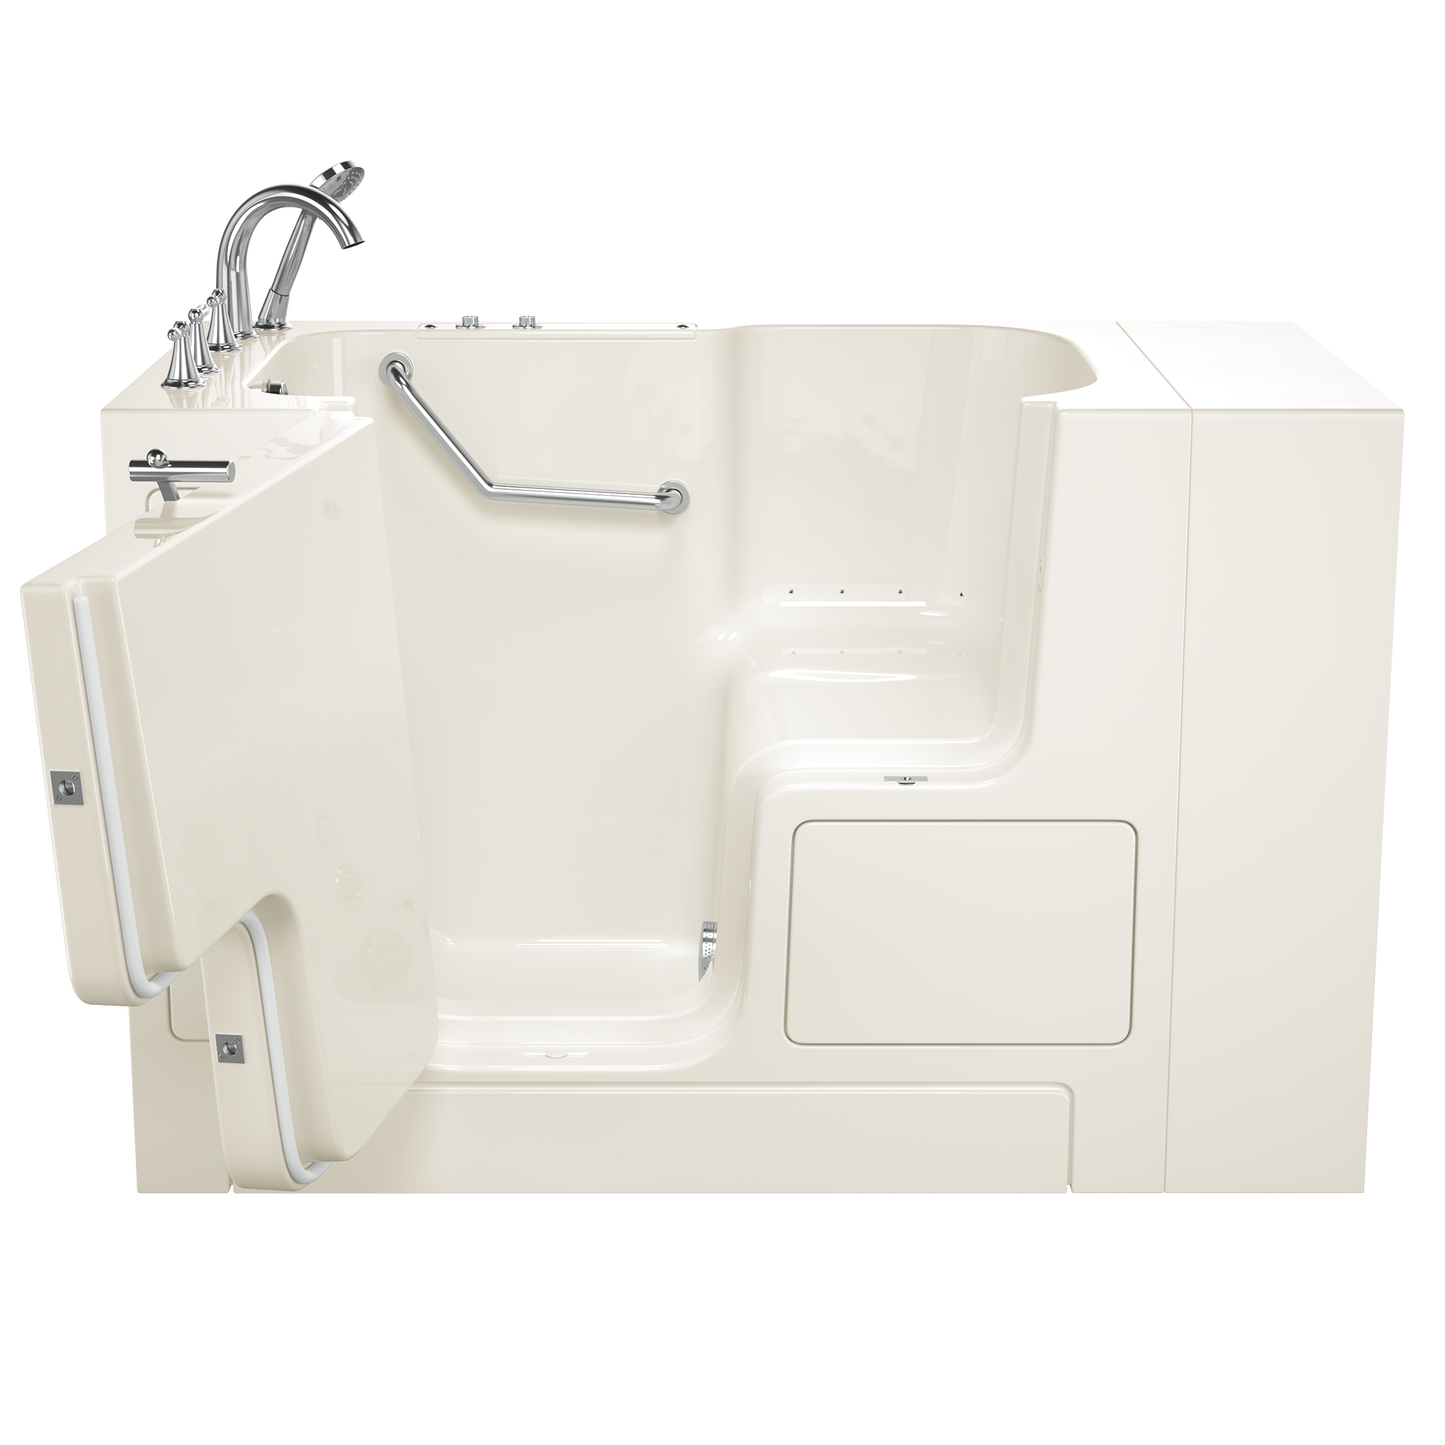 AMERICAN-STANDARD SS9OD5232LA-BC-PC, Gelcoat Premium Series 32 in. x 52 in. Outward Opening Door Walk-In Bathtub with Air Spa system in Wib Linen